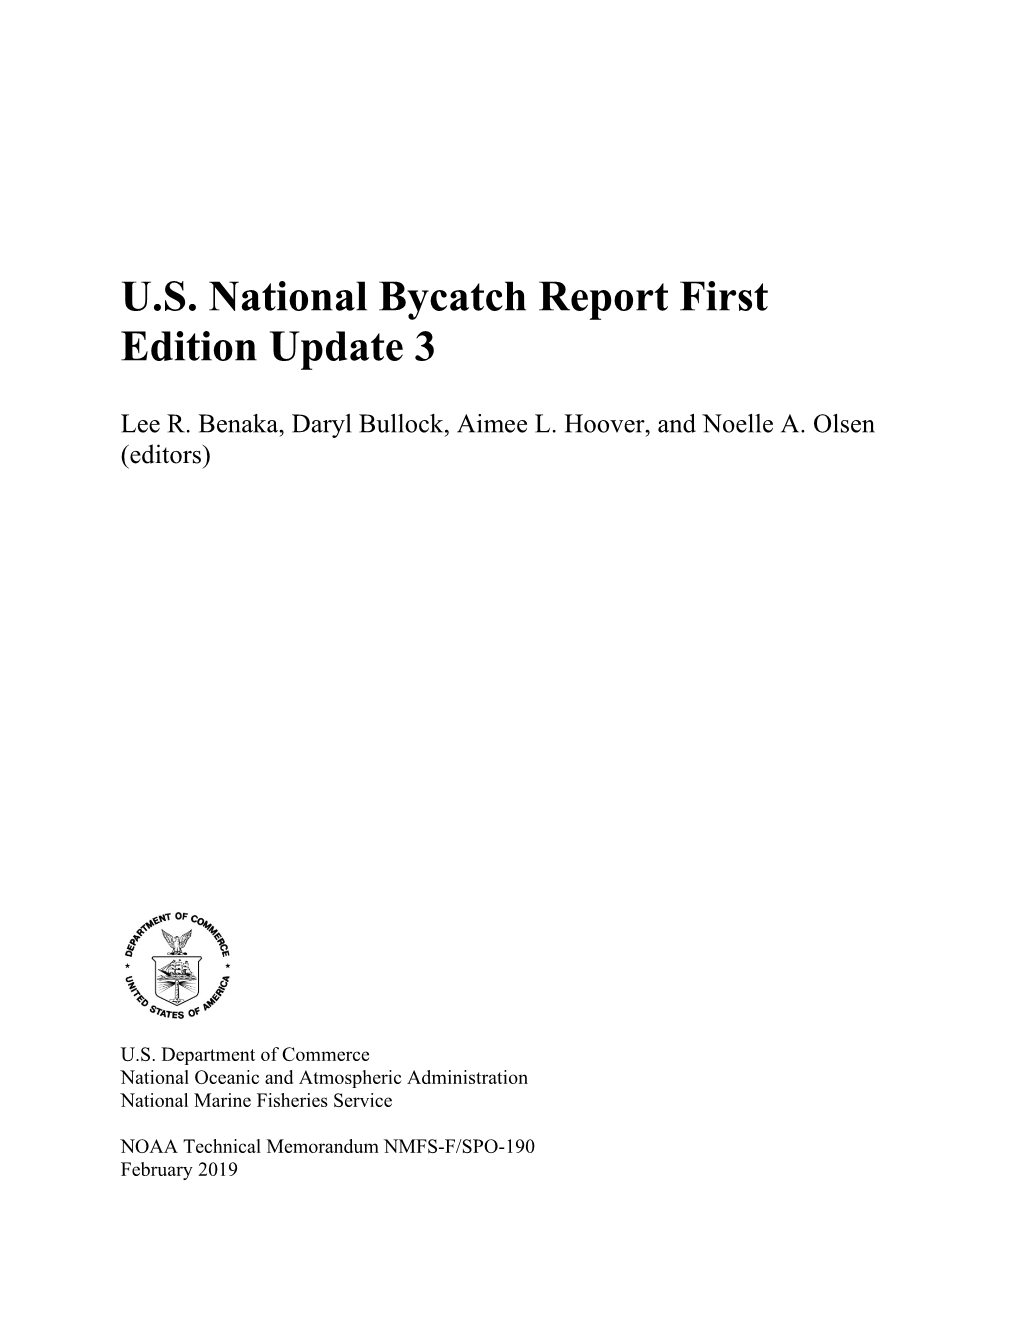 U.S. National Bycatch Report First Edition Update 3